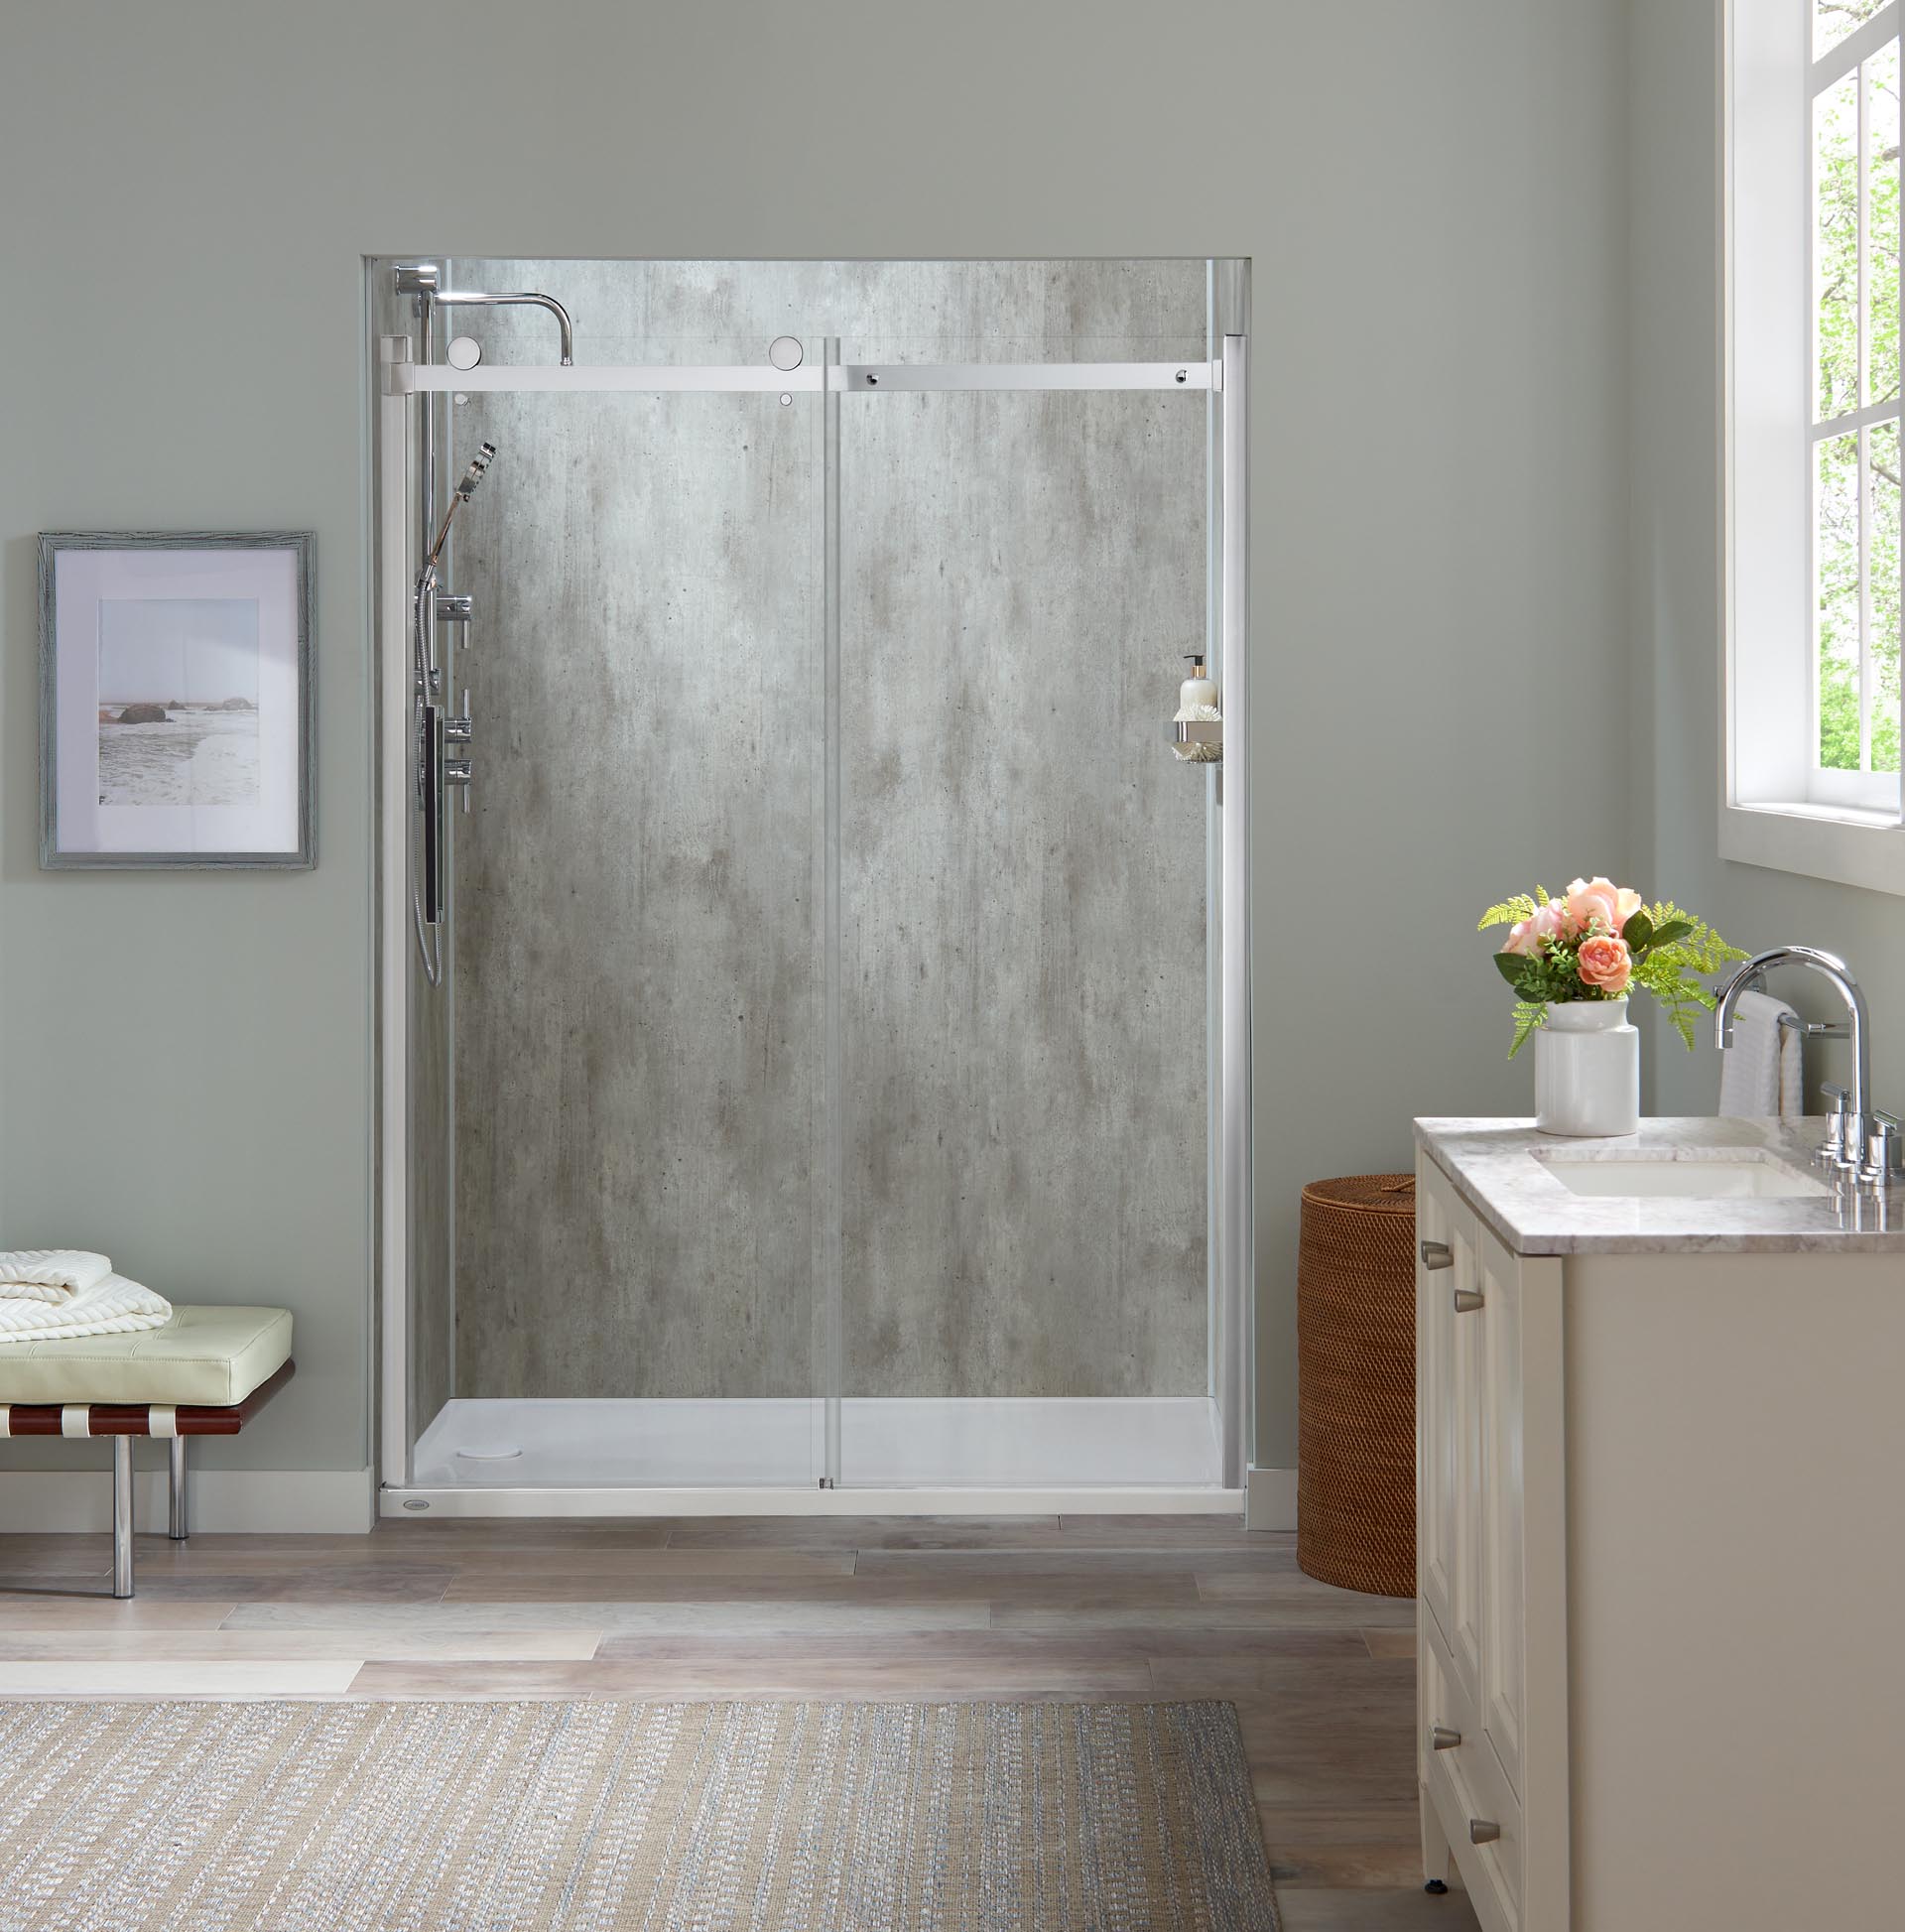 A step in shower has a sliding glass door with exposed rollers and a gray textured wall surround.